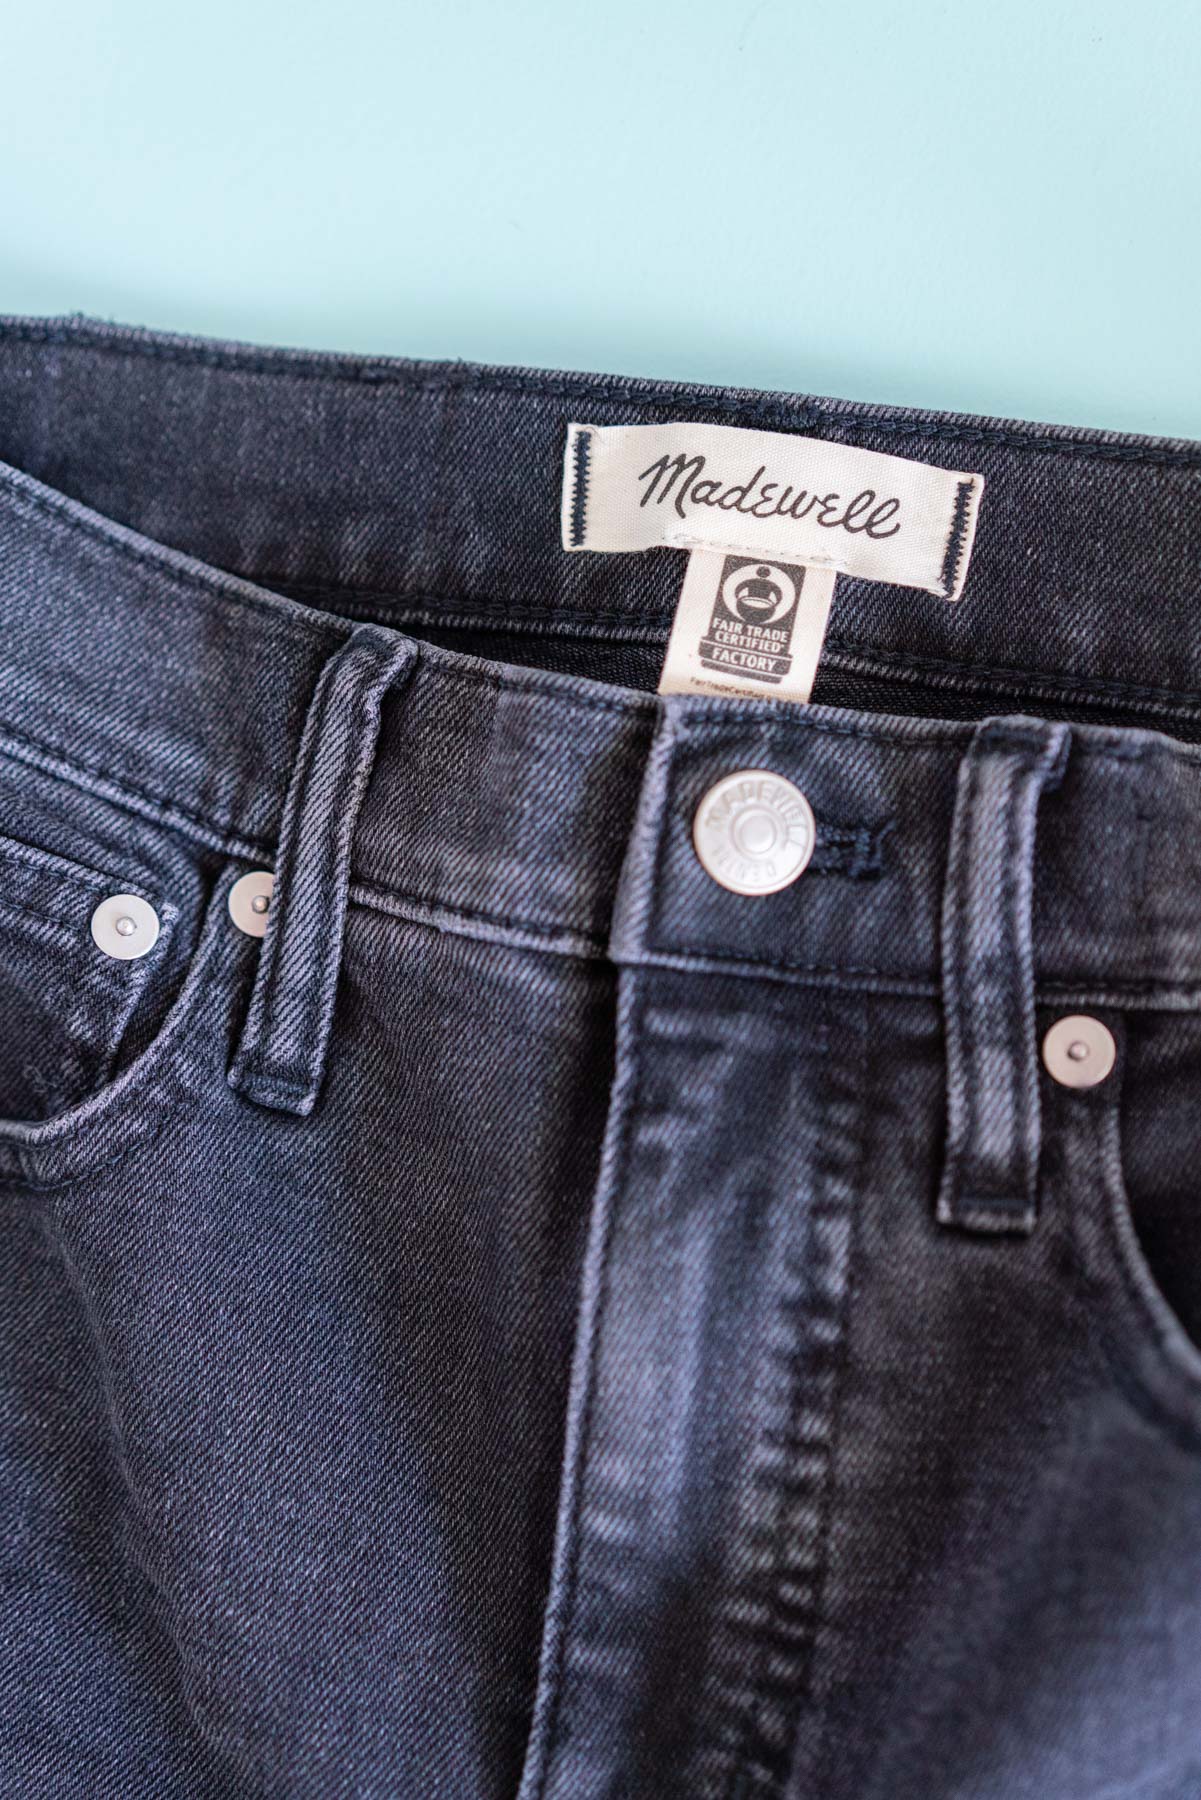 A close-up of Madewell's Classic Straight jeans and the Fair Trade tag inside of them